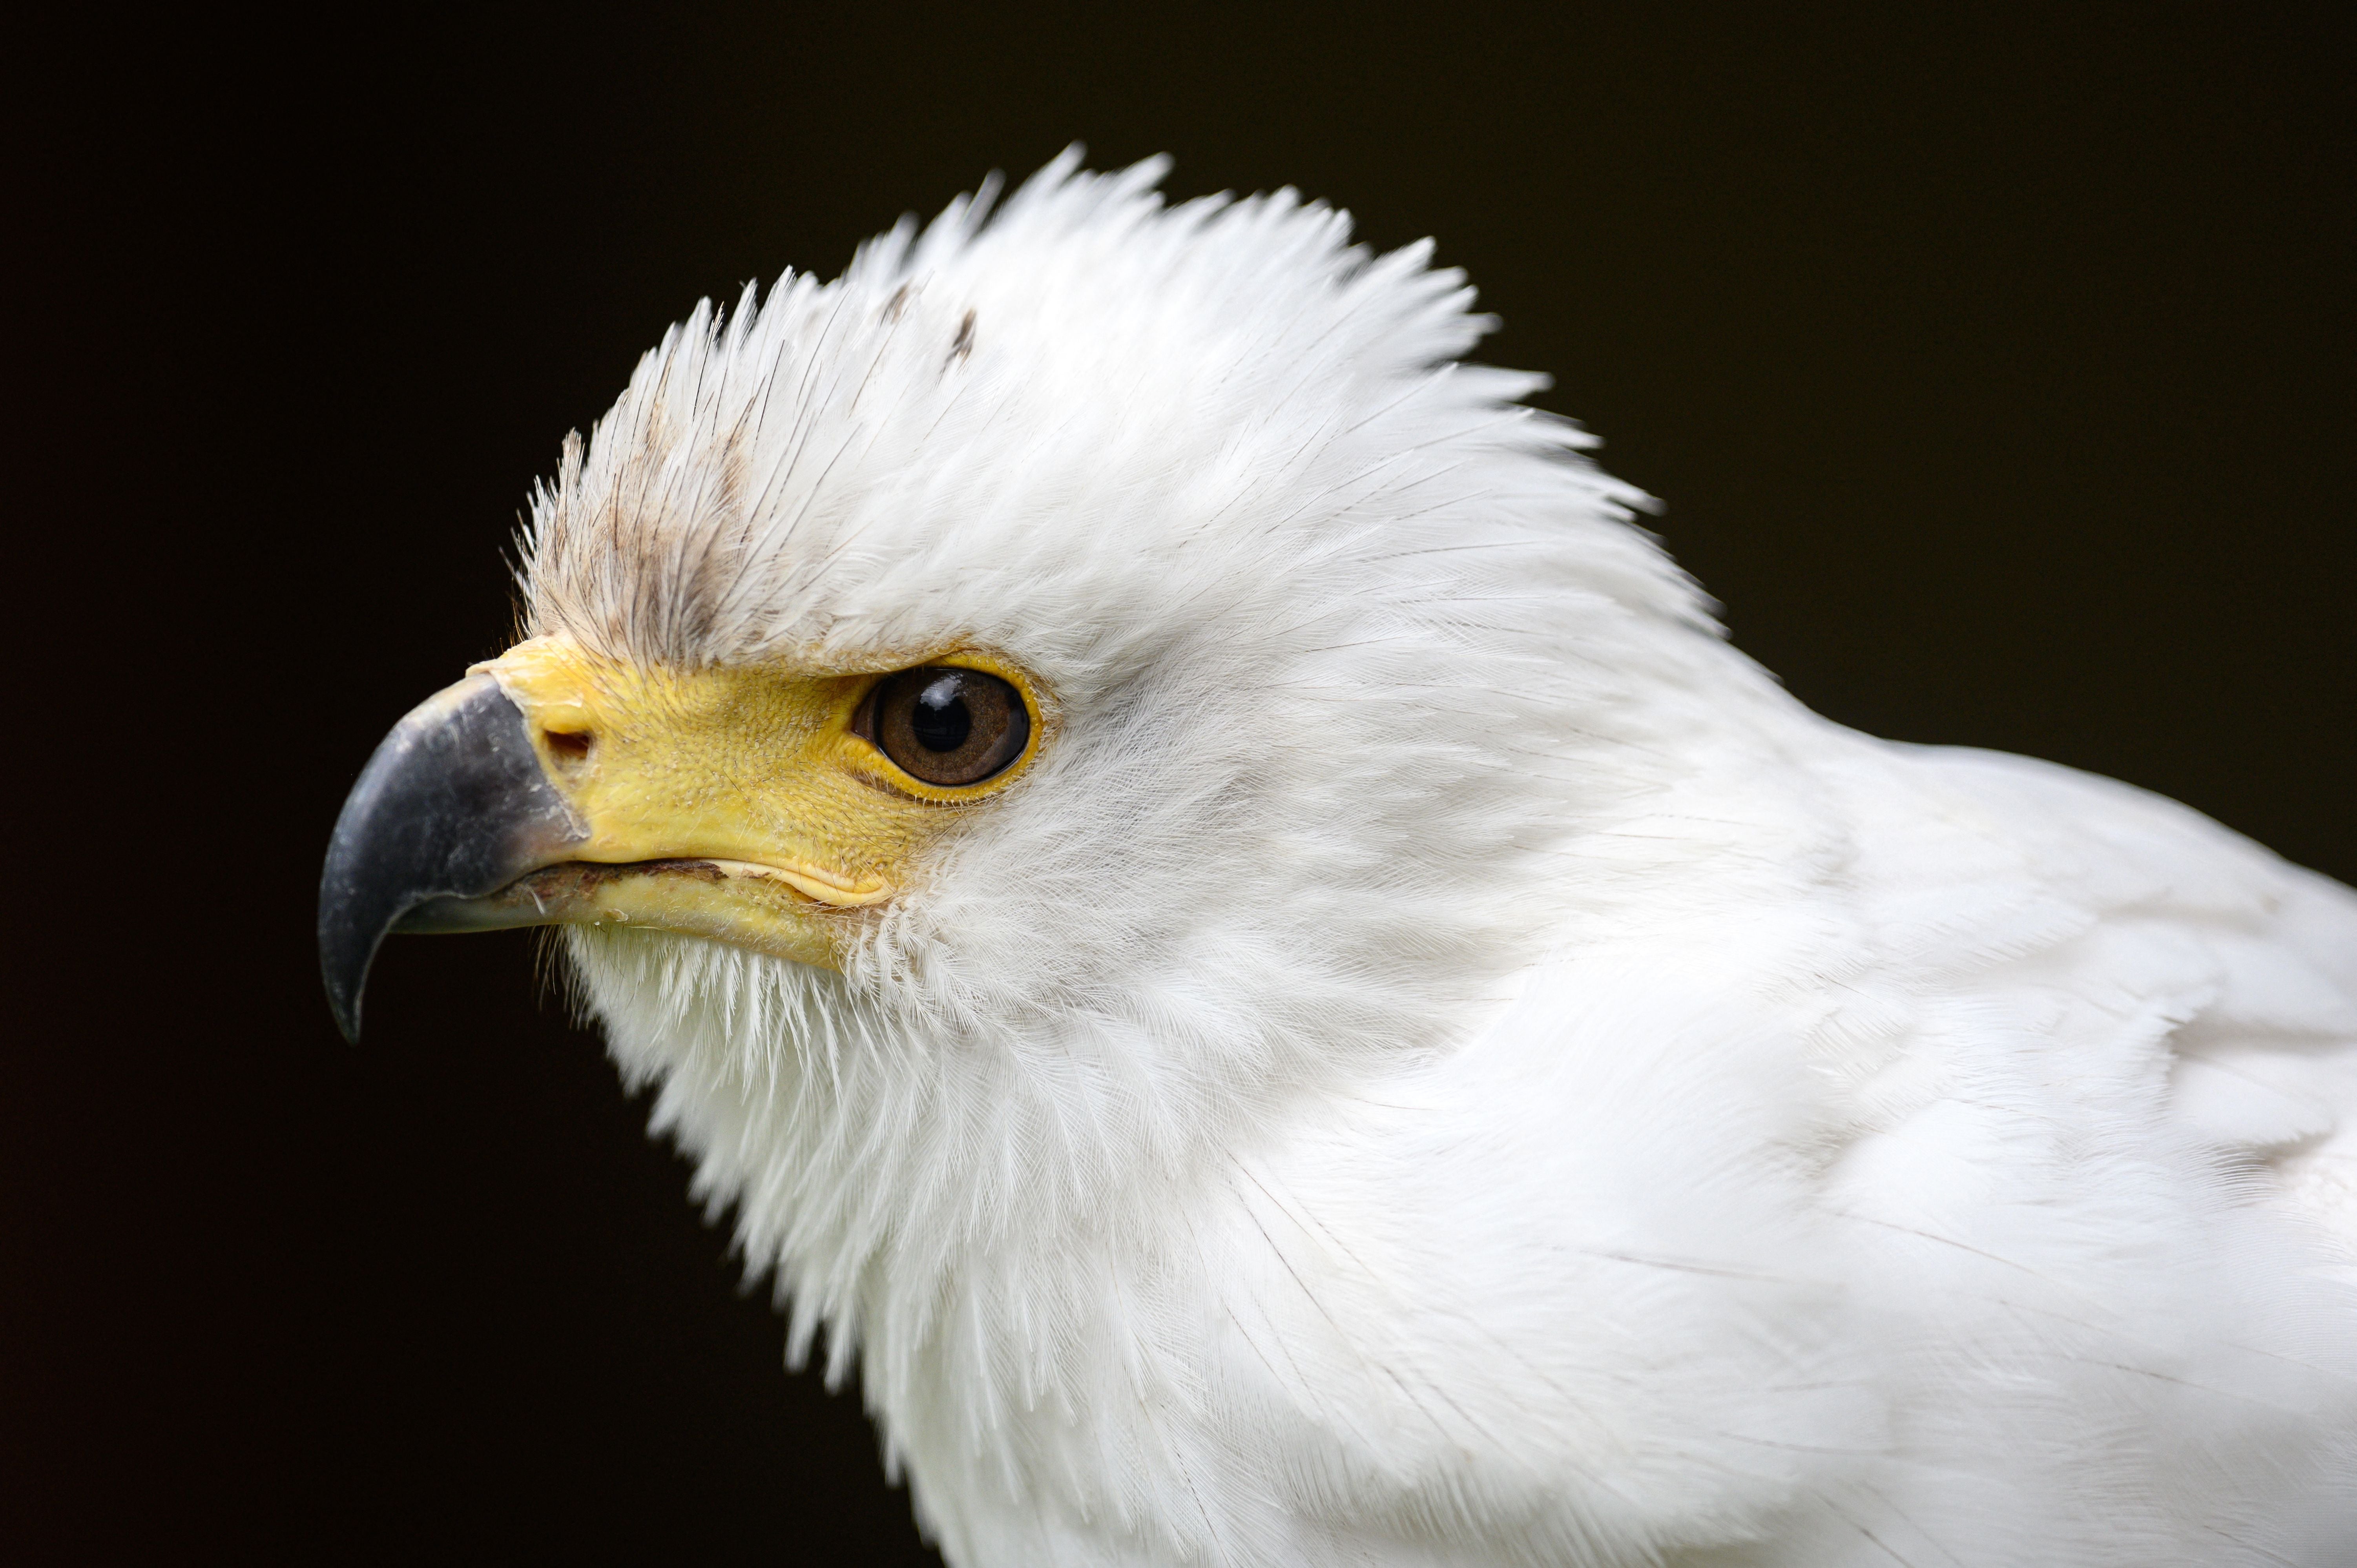 Pictured here: An African Fish Eagle at the British Falconry Fair held at the National Centre for Birds of Prey at Duncombe Park in northern England on 27 June 2021